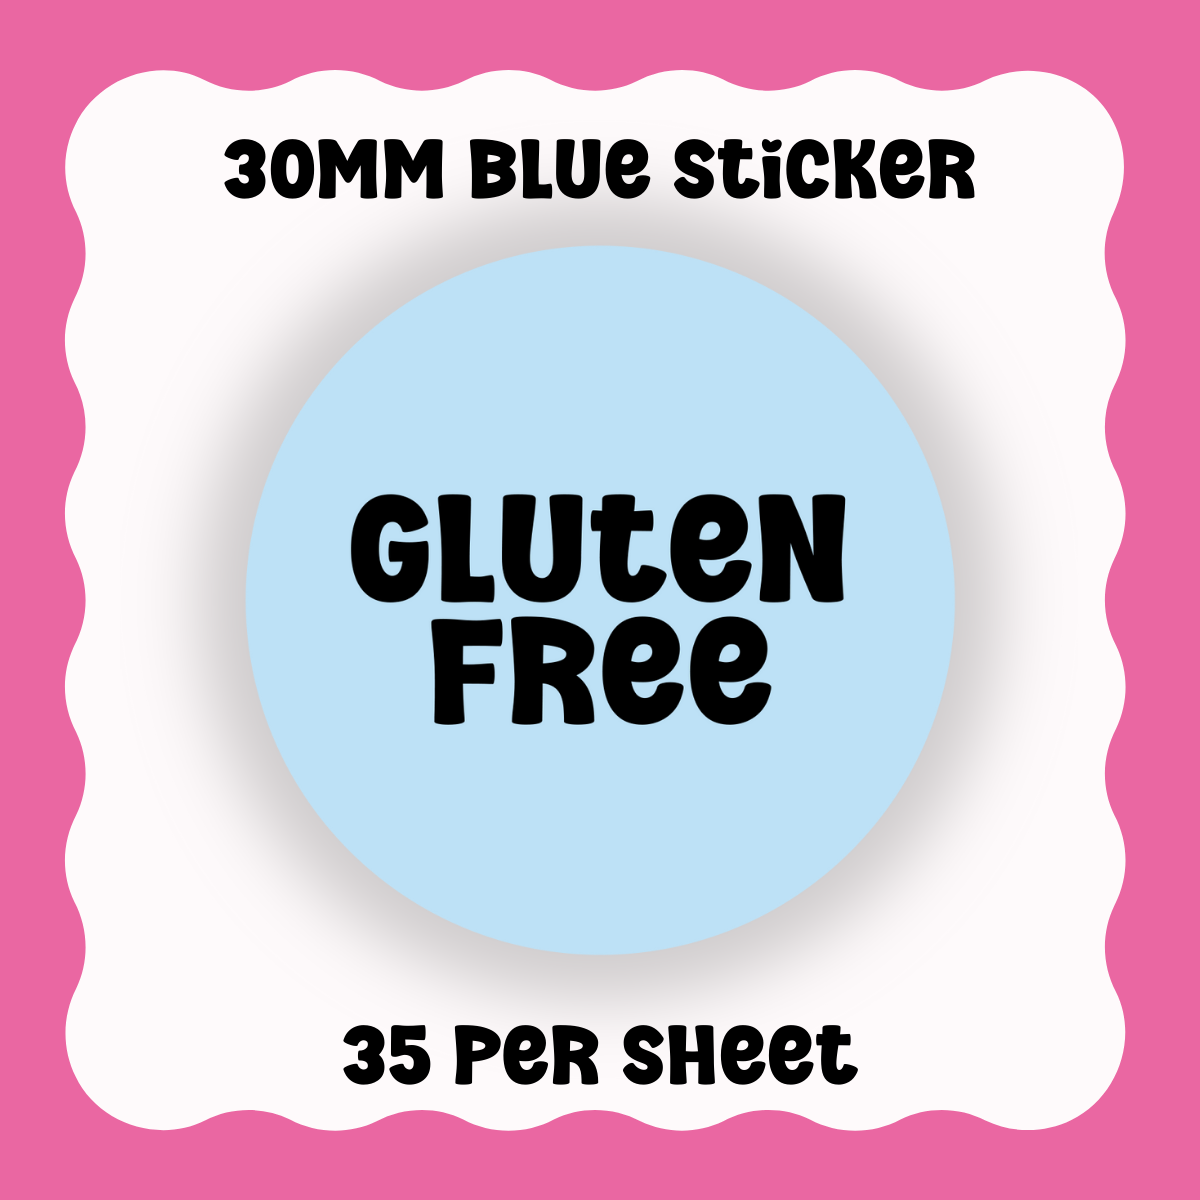 Gluten Free Stickers - Text only